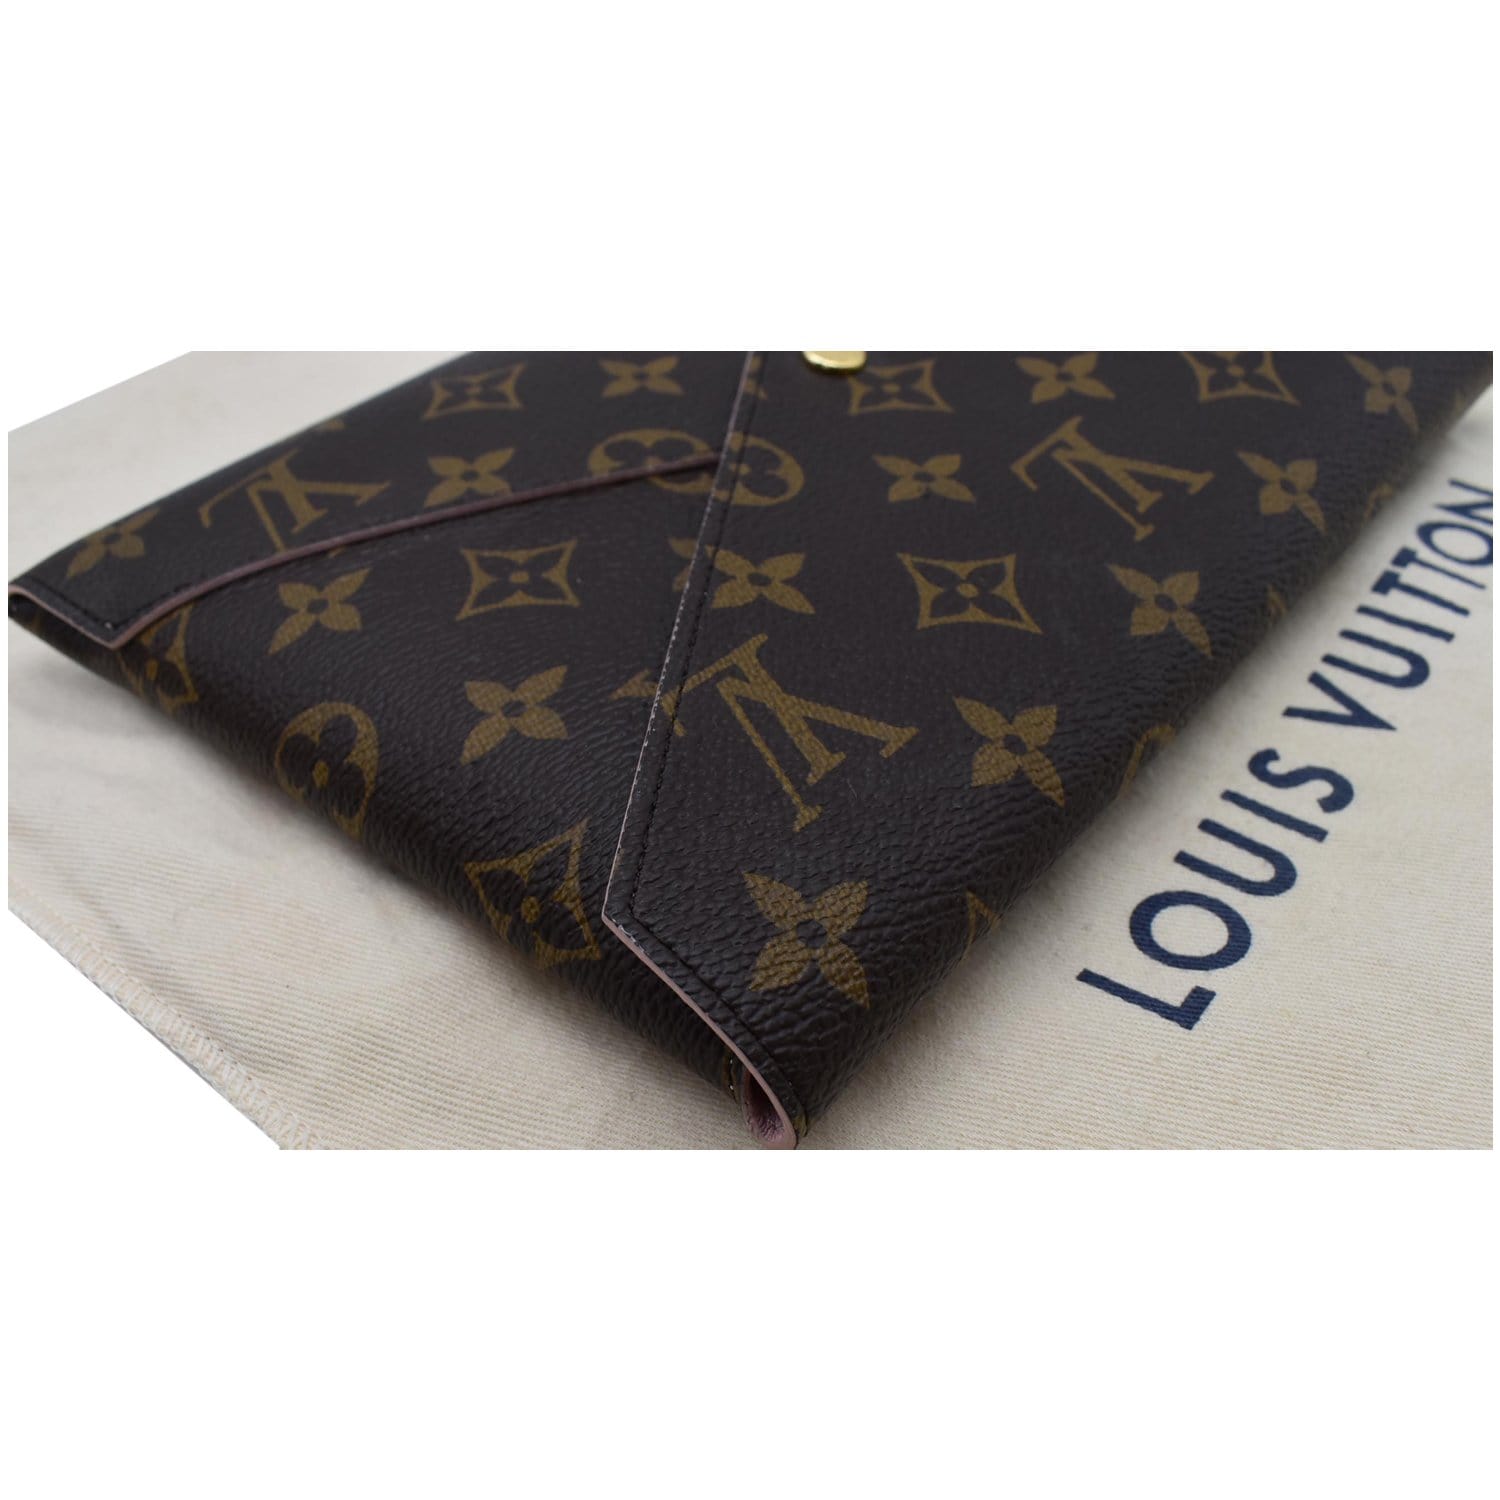 Kirigami Pochette Other Monogram Canvas - Wallets and Small